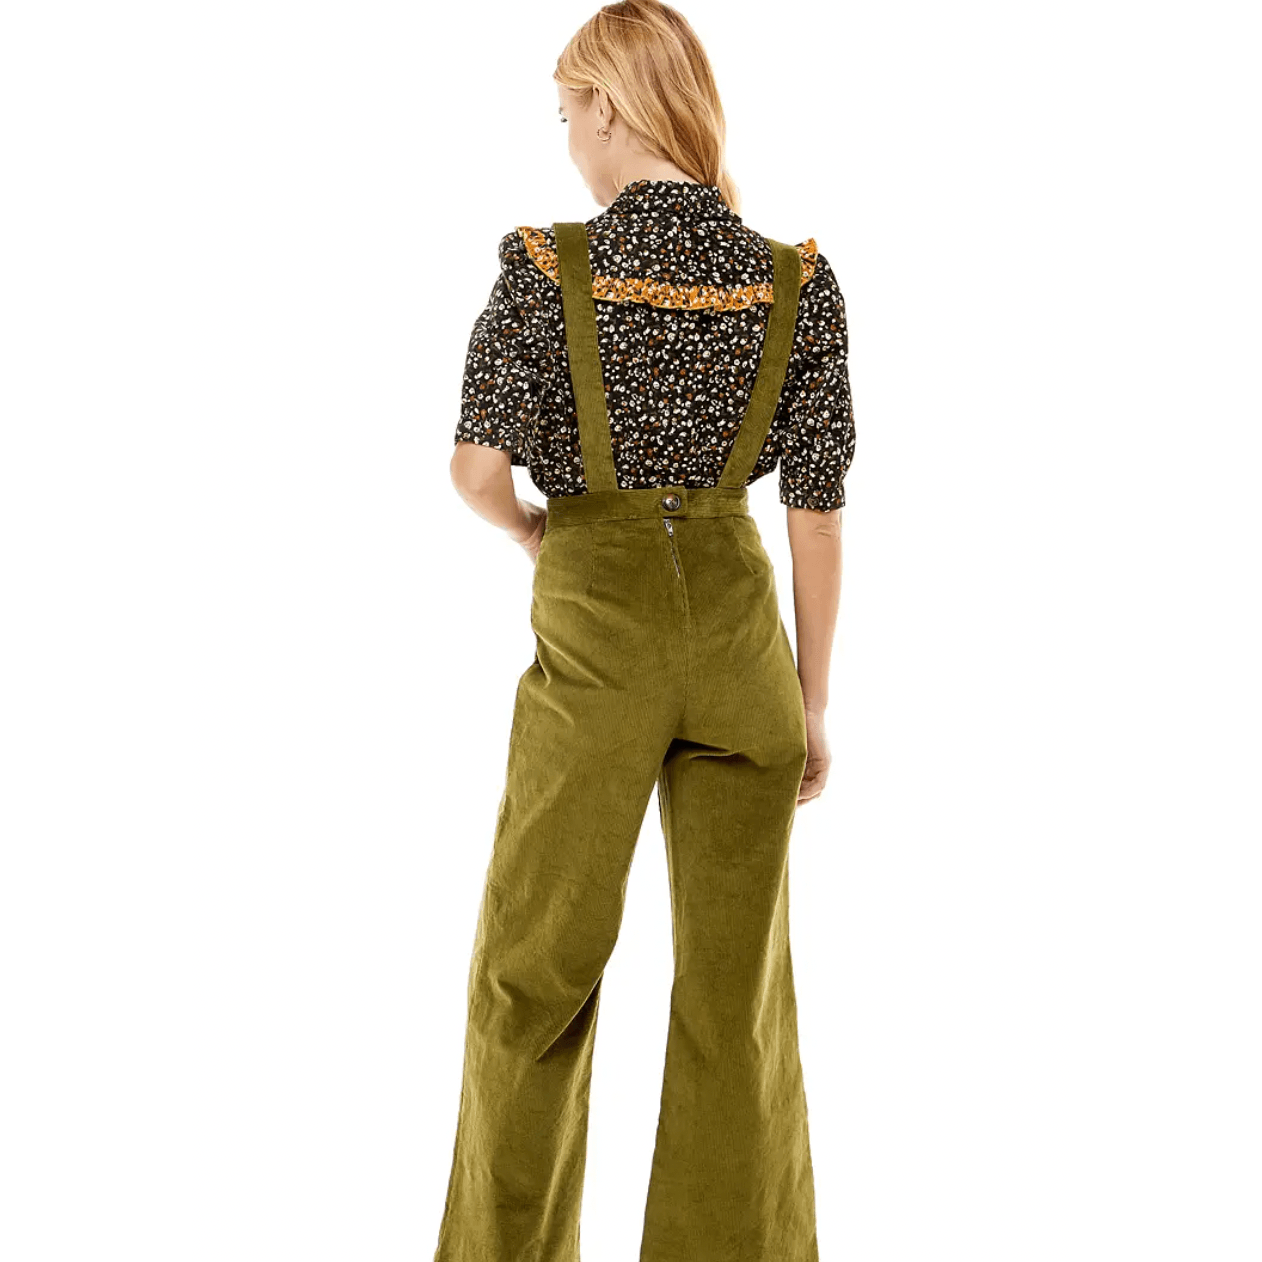 Avocado Overalls - Intrigue Ink Visit Bozeman, Unique Shopping Boutique in Montana, Work from Home Clothes for Women